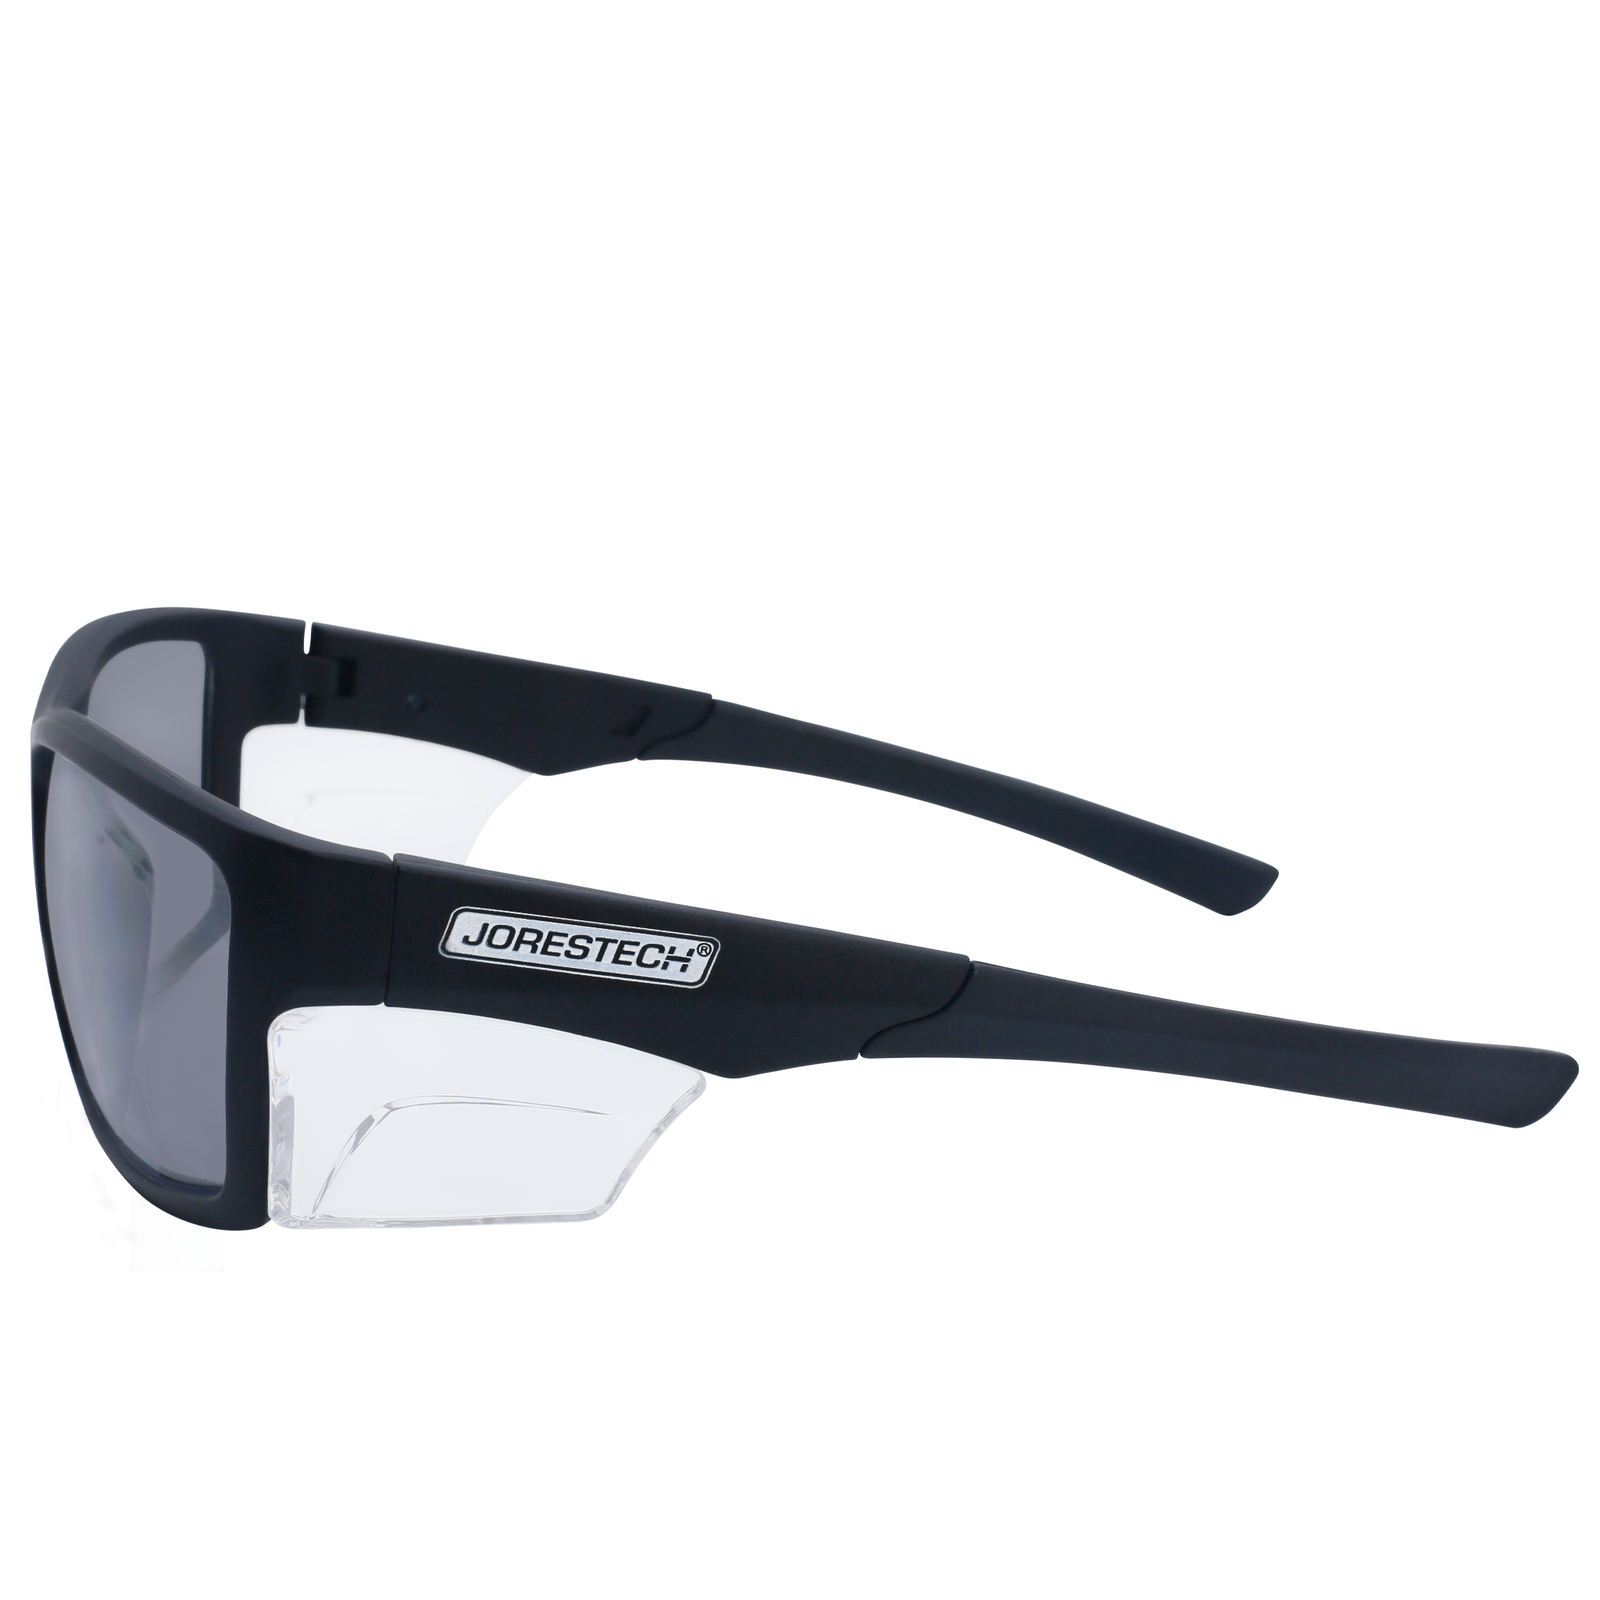 Image shows a side view of the smoke JORESTECH safety sun glasses with clear side shield for high impact protection. These safety glasses with clear side shields  are ANSI com[pliant and have black frame and smoke polycarbonate lenses. The background of the image is white